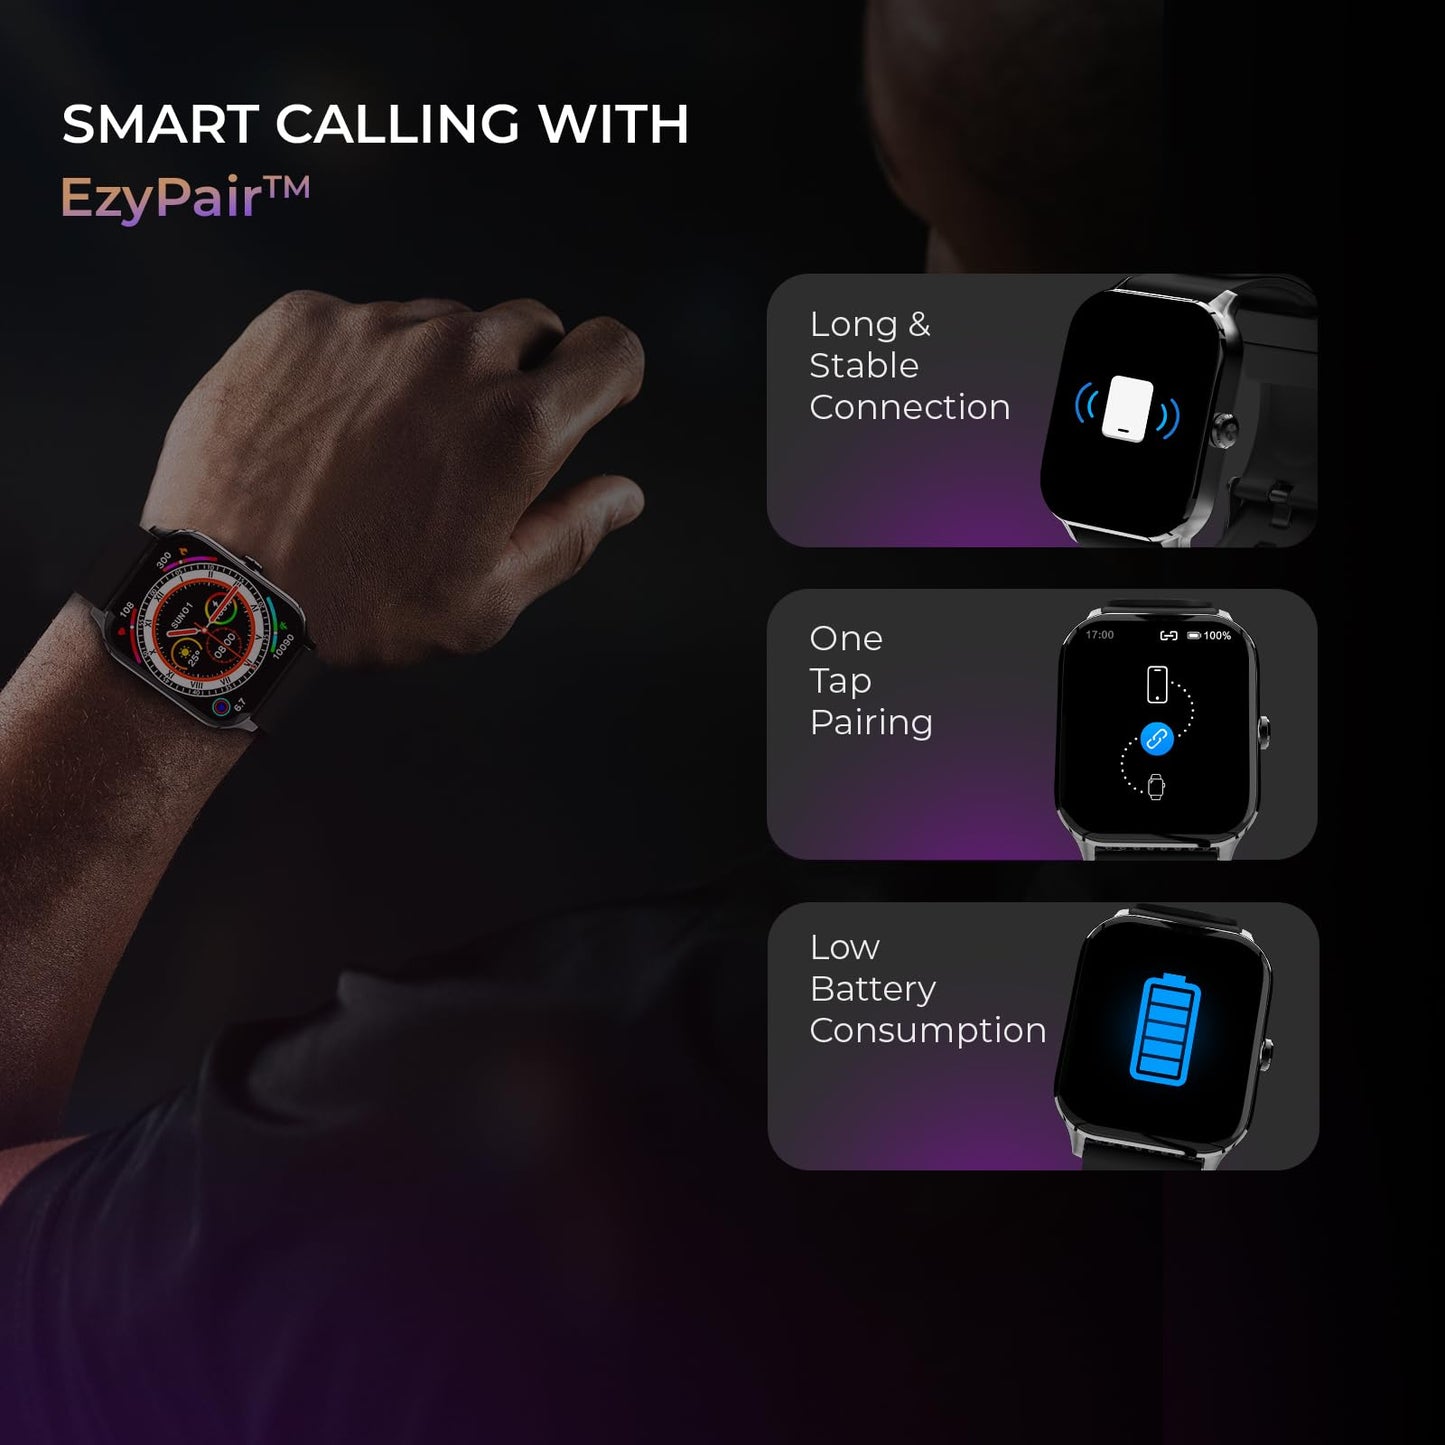 beatXP Marv Super Smart Watch| 2.0" HD Display | Ezy Pair Bluetooth Calling | AI Voice Assitance | Upto 7 Day Battery | 200+ Watchfaces | 100+ Sports Modes | SpO2 | Sleep Monitoring (Ice Silver)